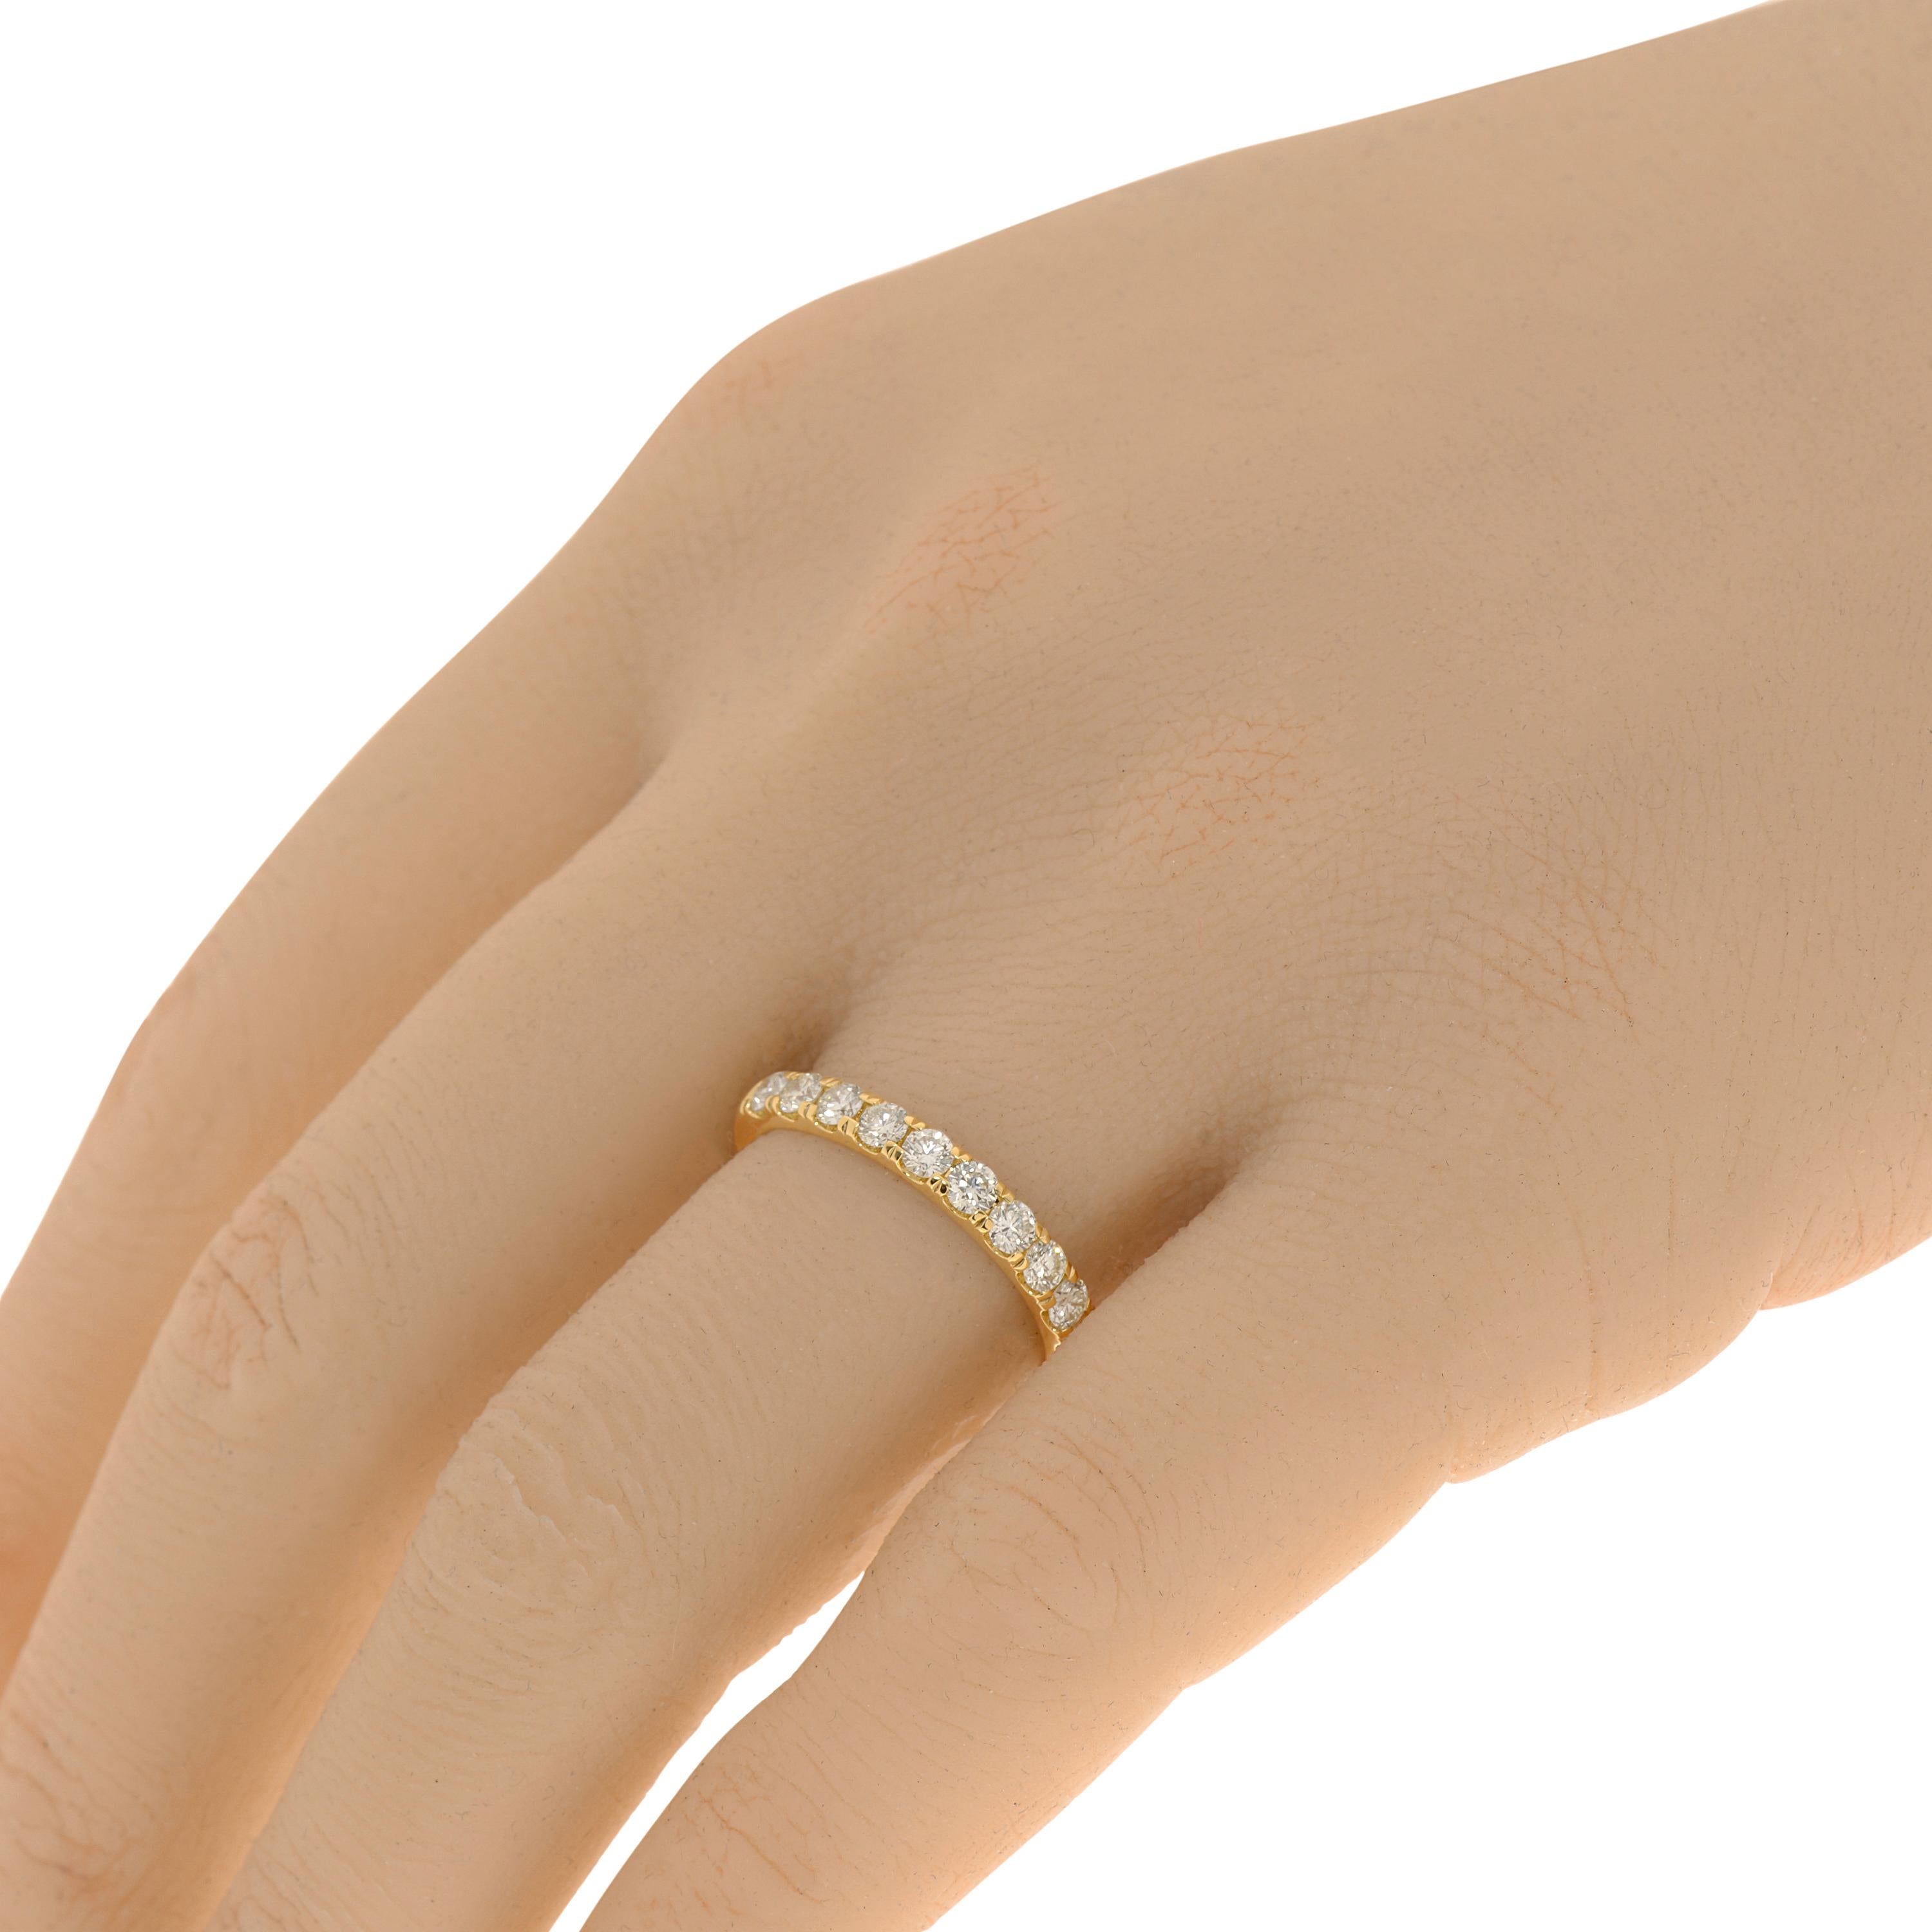 Tresorra 18k yellow gold band ring features 0.74ct. tw. diamonds with a color H and clarity VS-SI1. The ring size is 7 (54.4). The total weight is 3g.
